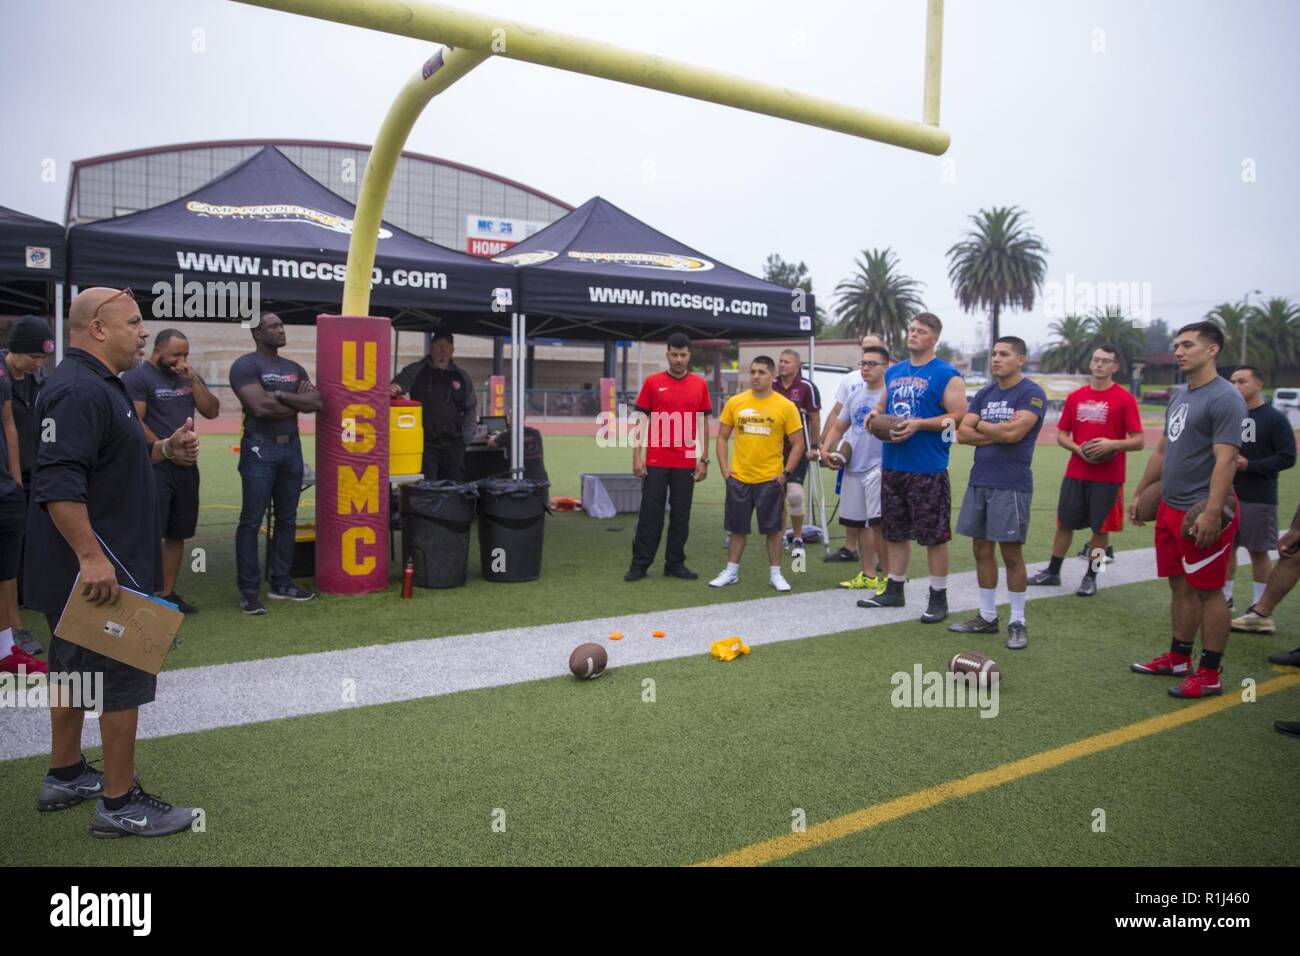 Mr. Eddie Bolanos, athletic director, Semper Fit, Marine Corps Community Services, briefs U.S. Marines on rules for the Commanding General’s Cup (CG’s Cup) Punt, Pass, & Kick competition at Paige Field House at Marine Corps Base (MCB) Camp Pendleton, California, Sept. 26, 2018. The CG’s Cup is an intramural sports program that was developed to give service members from various units across MCB Camp Pendleton an opportunity to compete in organized sporting events in order to promote combat readiness, teamwork and esprit de corps. The CG’s cup also allows service members to earn points for their Stock Photo